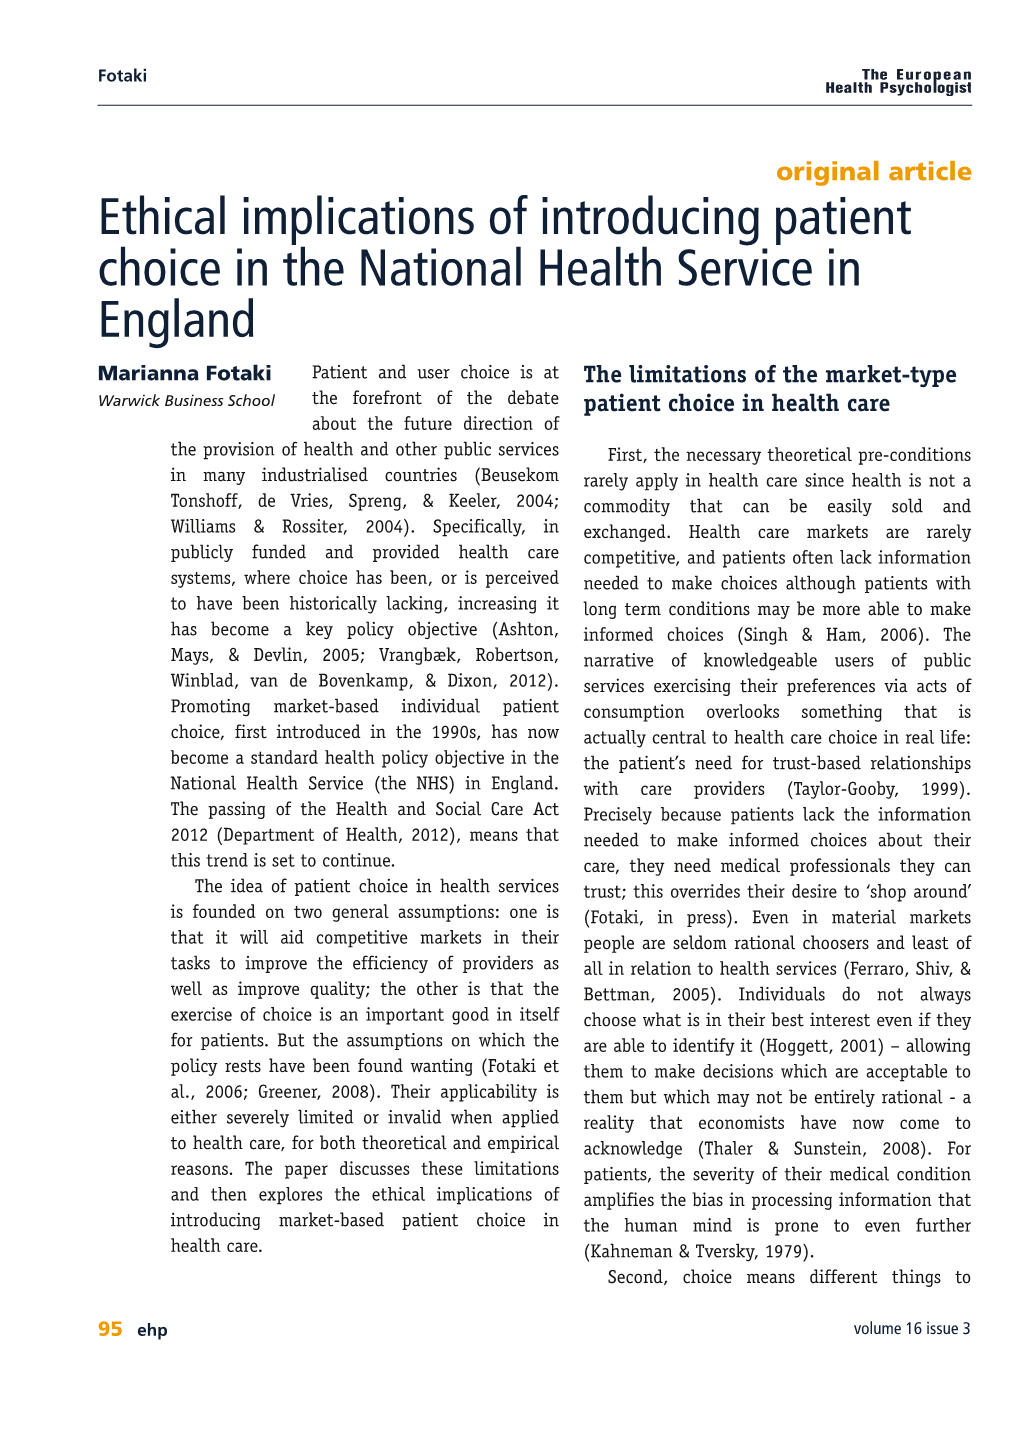 Ethical Implications of Introducing Patient Choice in the National Health Service in England